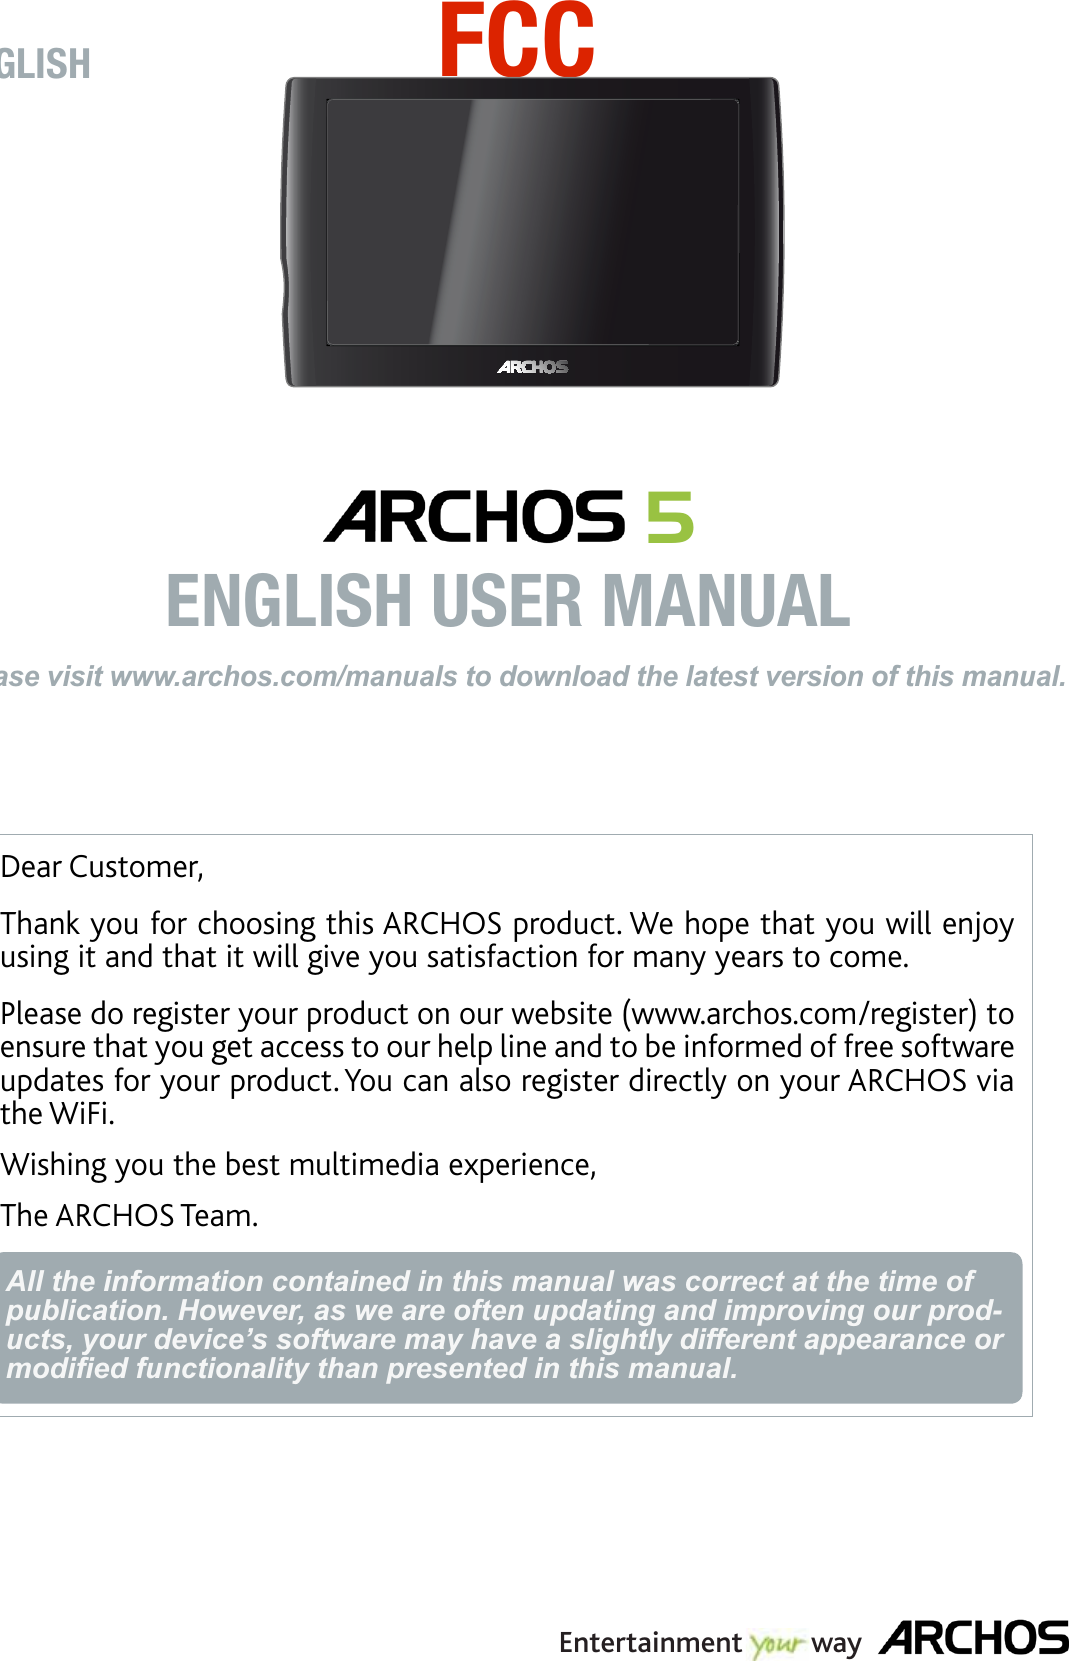 Dear Customer,Thank you for choosing this ARCHOS product. We hope that you will enjoy using it and that it will give you satisfaction for many years to come. Please do register your product on our website (www.archos.com/register) to ensure that you get access to our help line and to be informed of free software updates for your product. You can also register directly on your ARCHOS via the WiFi.Wishing you the best multimedia experience,The ARCHOS Team.All the information contained in this manual was correct at the time of publication. However, as we are often updating and improving our prod-ucts, your device’s software may have a slightly different appearance or modiﬁed functionality than presented in this manual.ENGLISHPlease visit www.archos.com/manuals to download the latest version of this manual. 5  ENGLISH USER MANUALEntertainment         wayFCC